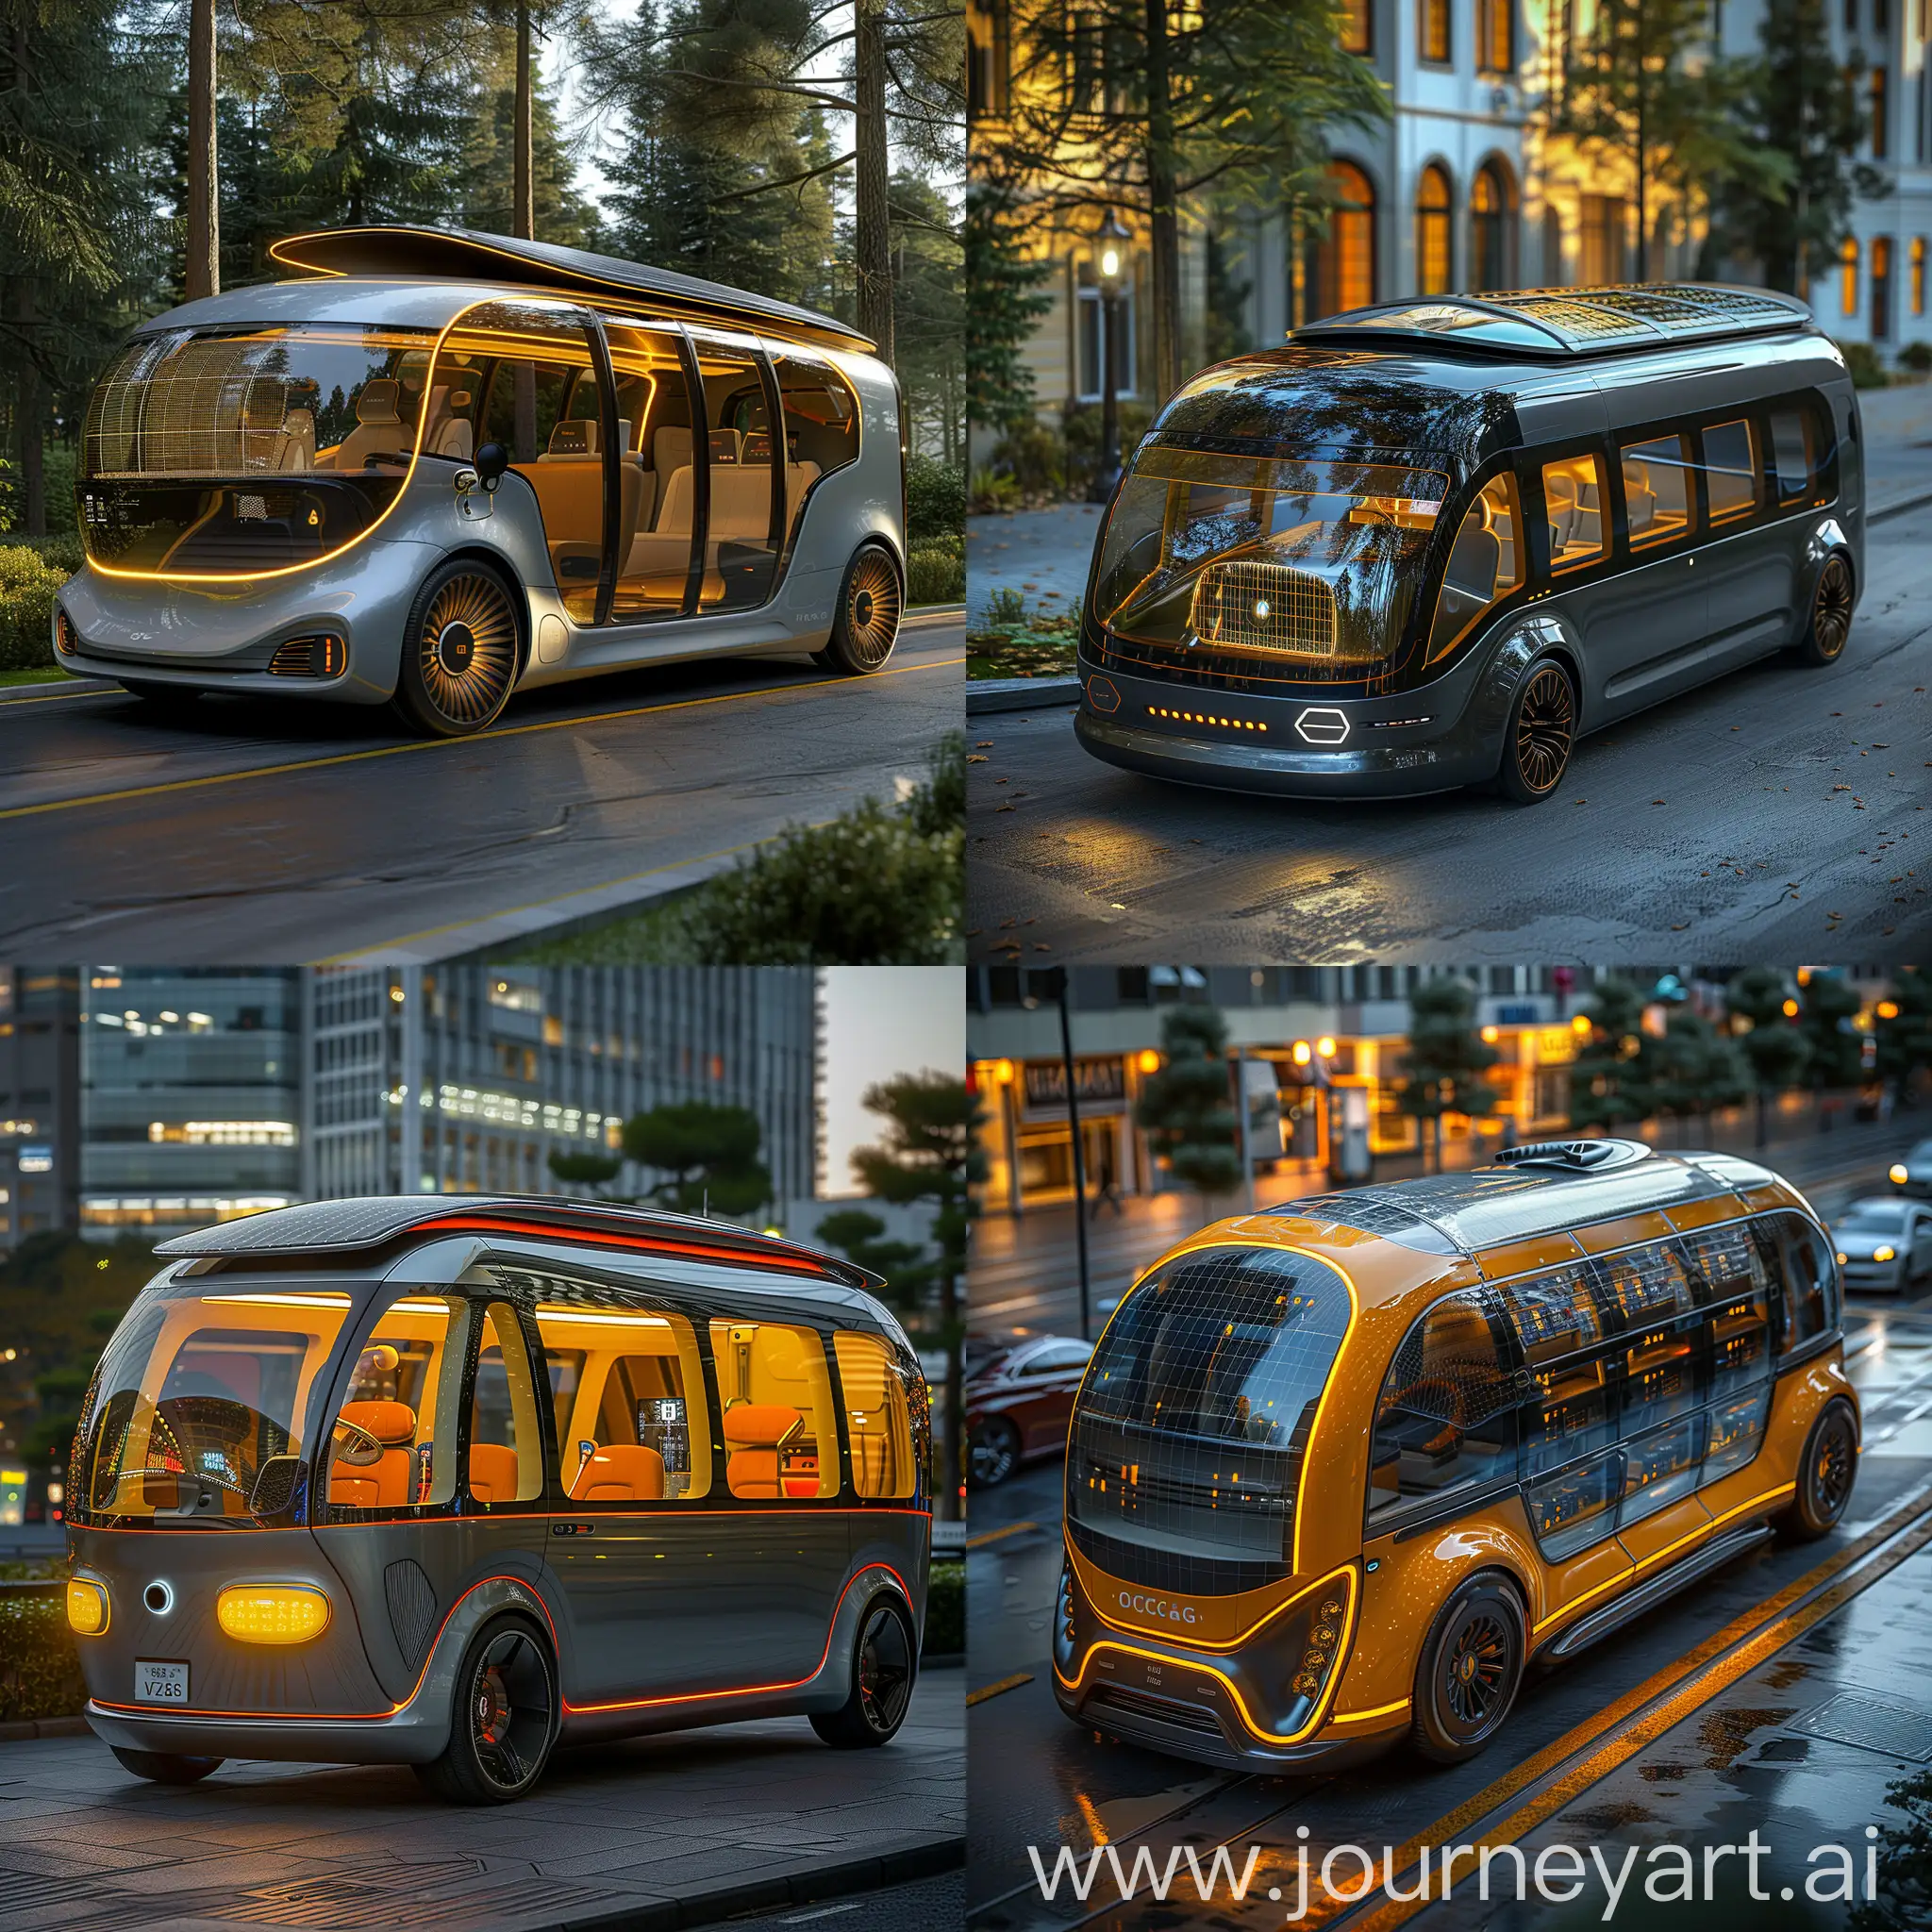 Ultramodern, futuristic microbus, Self-Charging Solar Roof, Hydrogen Fuel Cell, Regenerative Braking, Lightweight Construction, Aerodynamic Design, Thermally Efficient Climate Control, Eco-Friendly Materials, Smart Route Planning, Vehicle-to-Grid (V2G) Technology, Over-the-Air (OTA) Updates, Autonomous Driving, Augmented Reality Windshield, Biometric Entry and Security, Voice-Activated Controls, Heads-Up Display (HUD), Panoramic Sunroof with Switchable Transparency, Foldable and Removable Seats, Robotic Cleaning System, Advanced Driver-Assistance Systems (ADAS), In-Vehicle Entertainment System with AI Assistant, octane render --stylize 1000